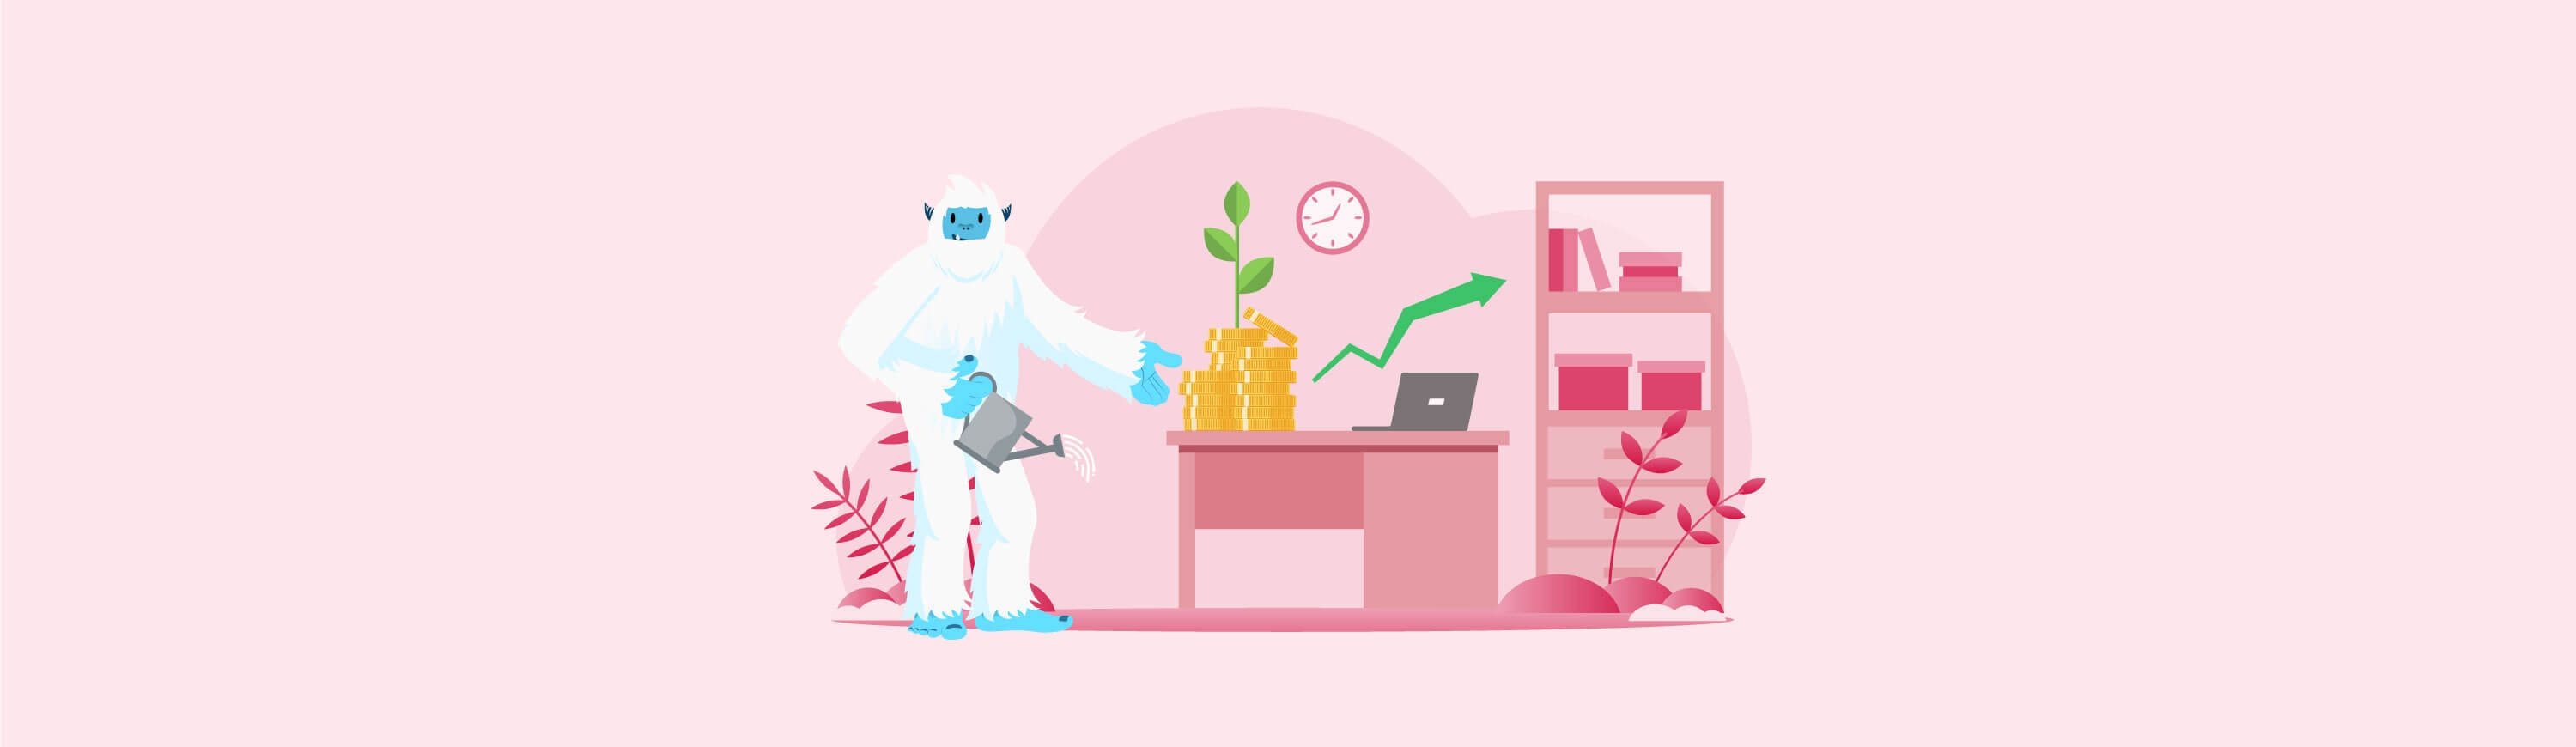 Illustration of Carl the yeti watering plants next to his work desk.